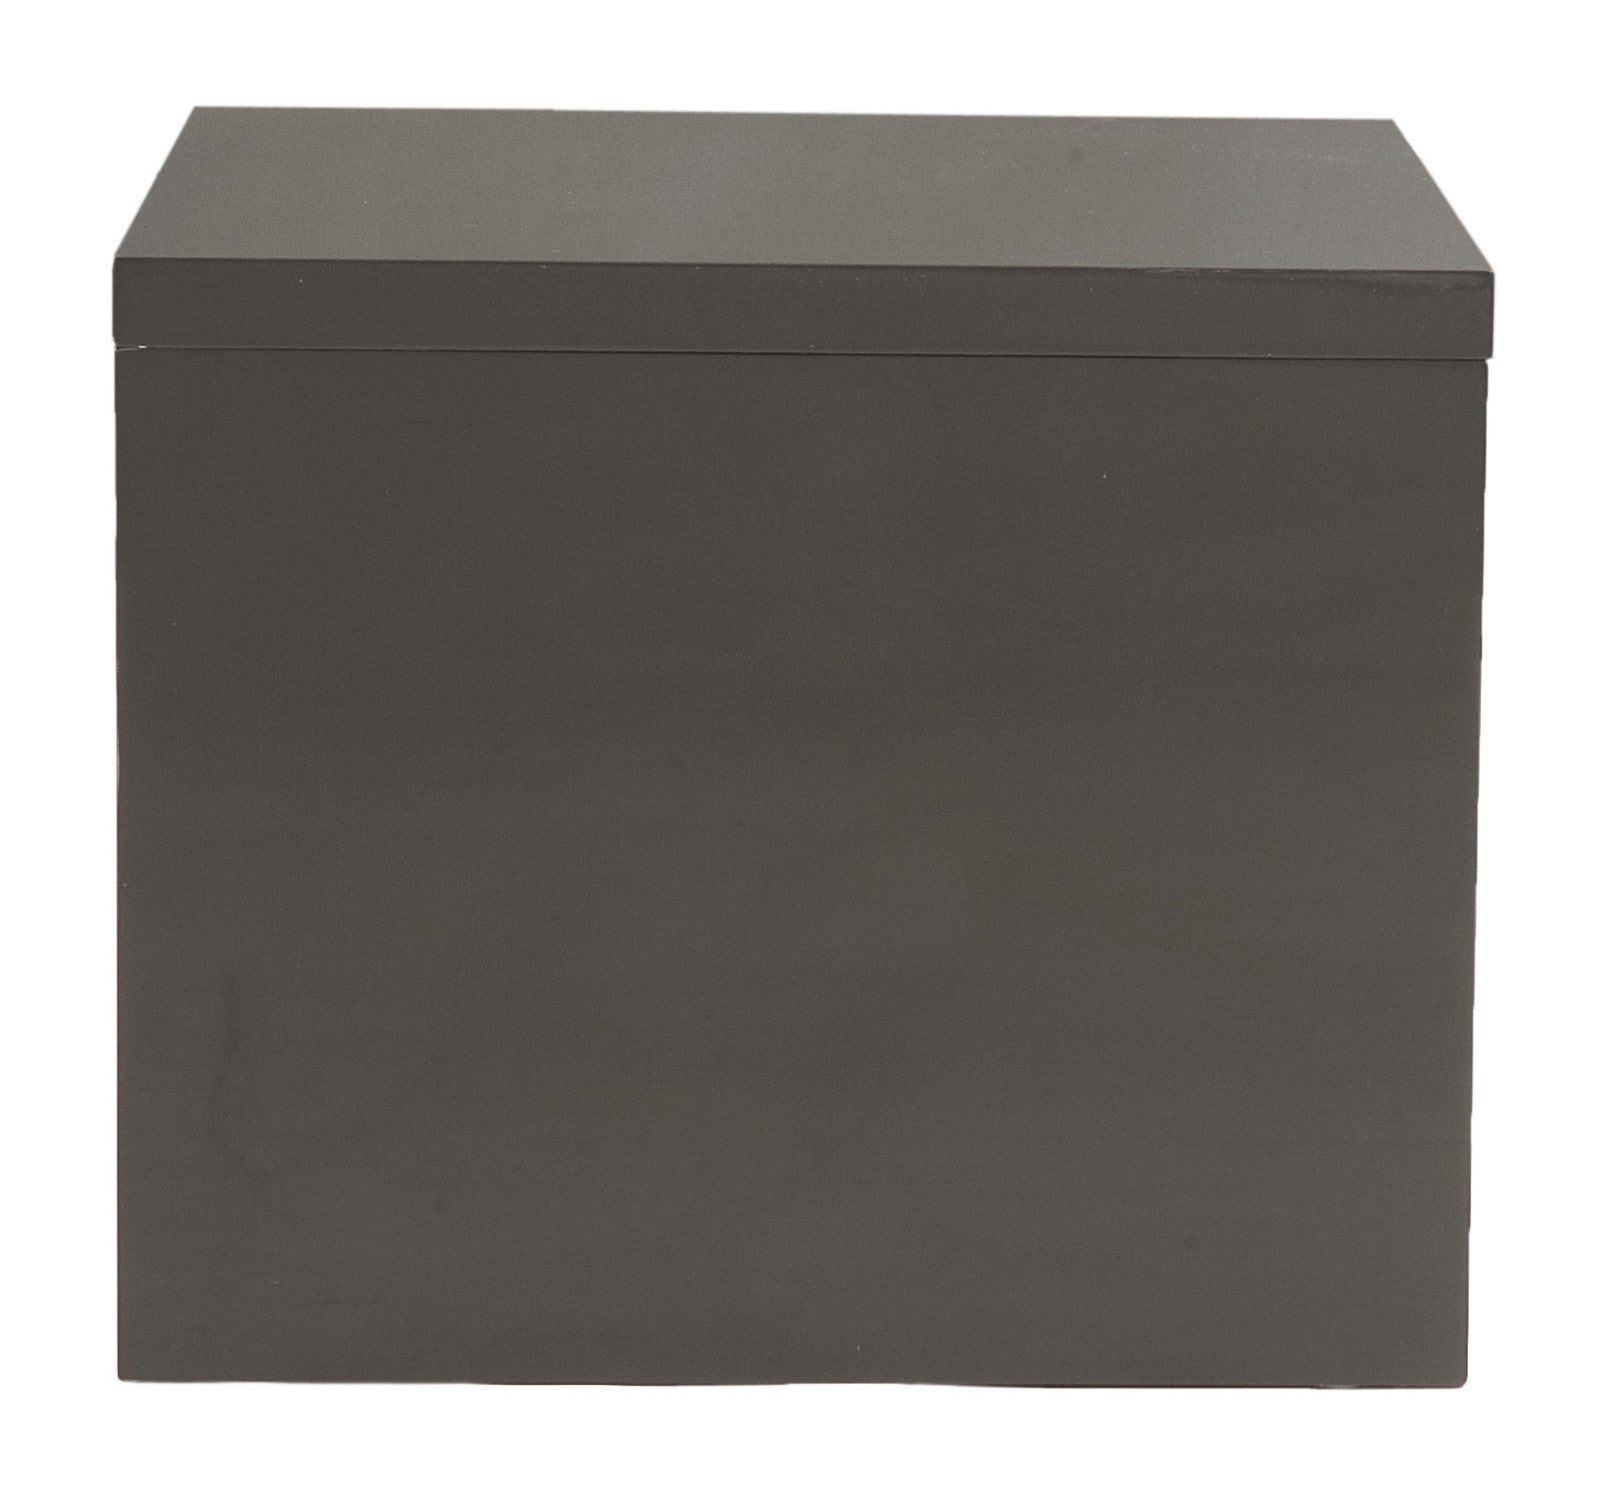 Able Side Table Gray Lacquer